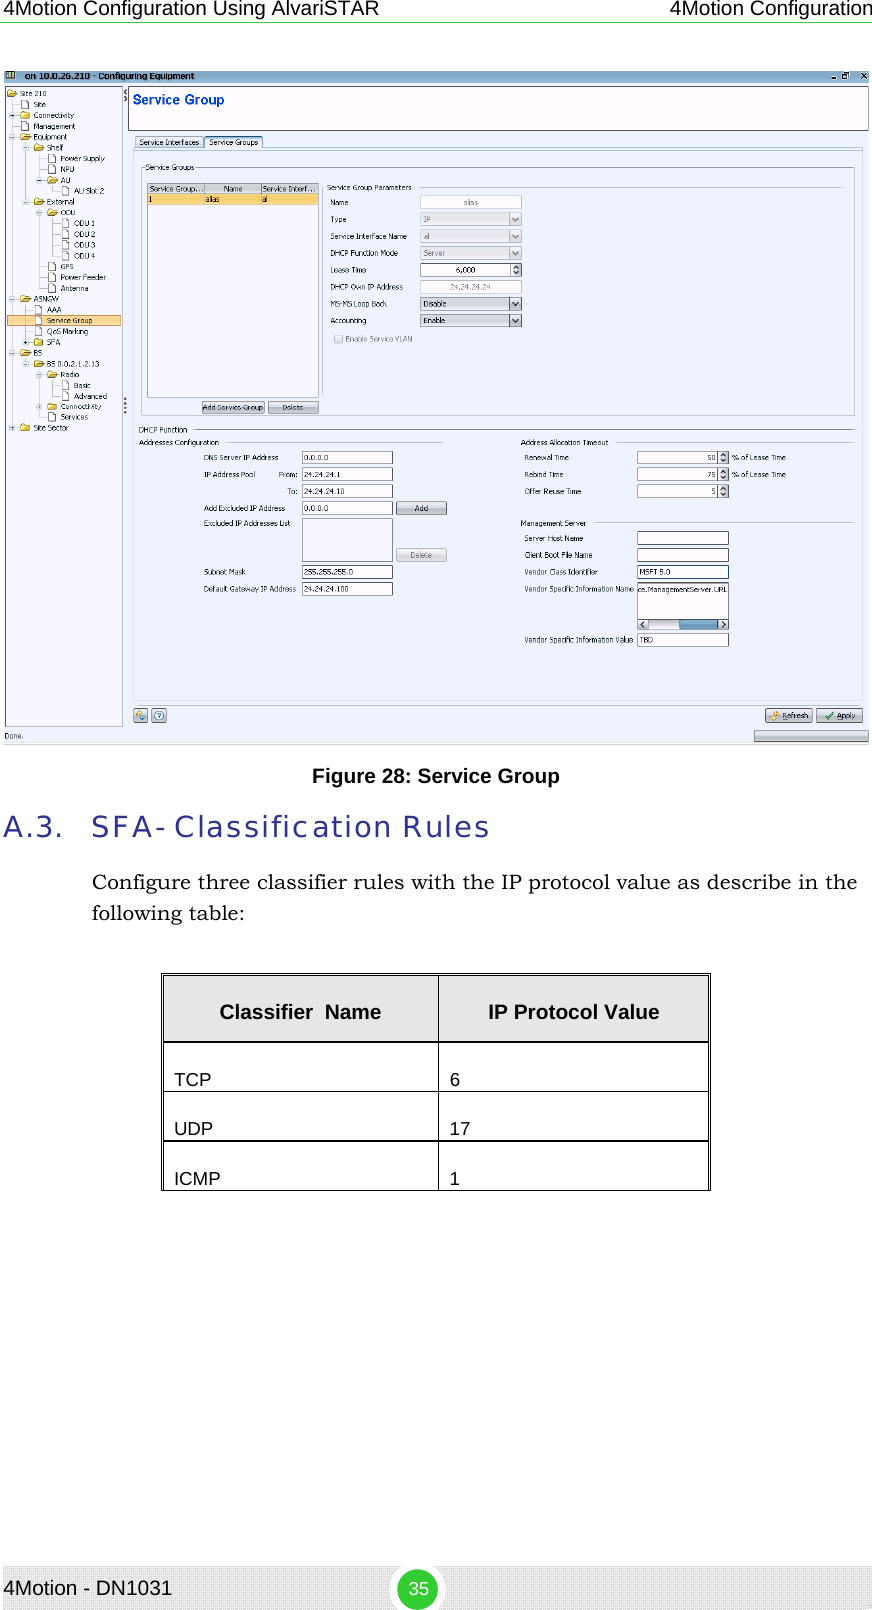 4Motion Configuration Using AlvariSTAR 4Motion Configuration  Figure 28: Service Group A.3. SFA- Classification Rules Configure three classifier rules with the IP protocol value as describe in the following table:  Classifier  Name  IP Protocol Value TCP 6 UDP 17 ICMP 1 4Motion - DN1031  35 